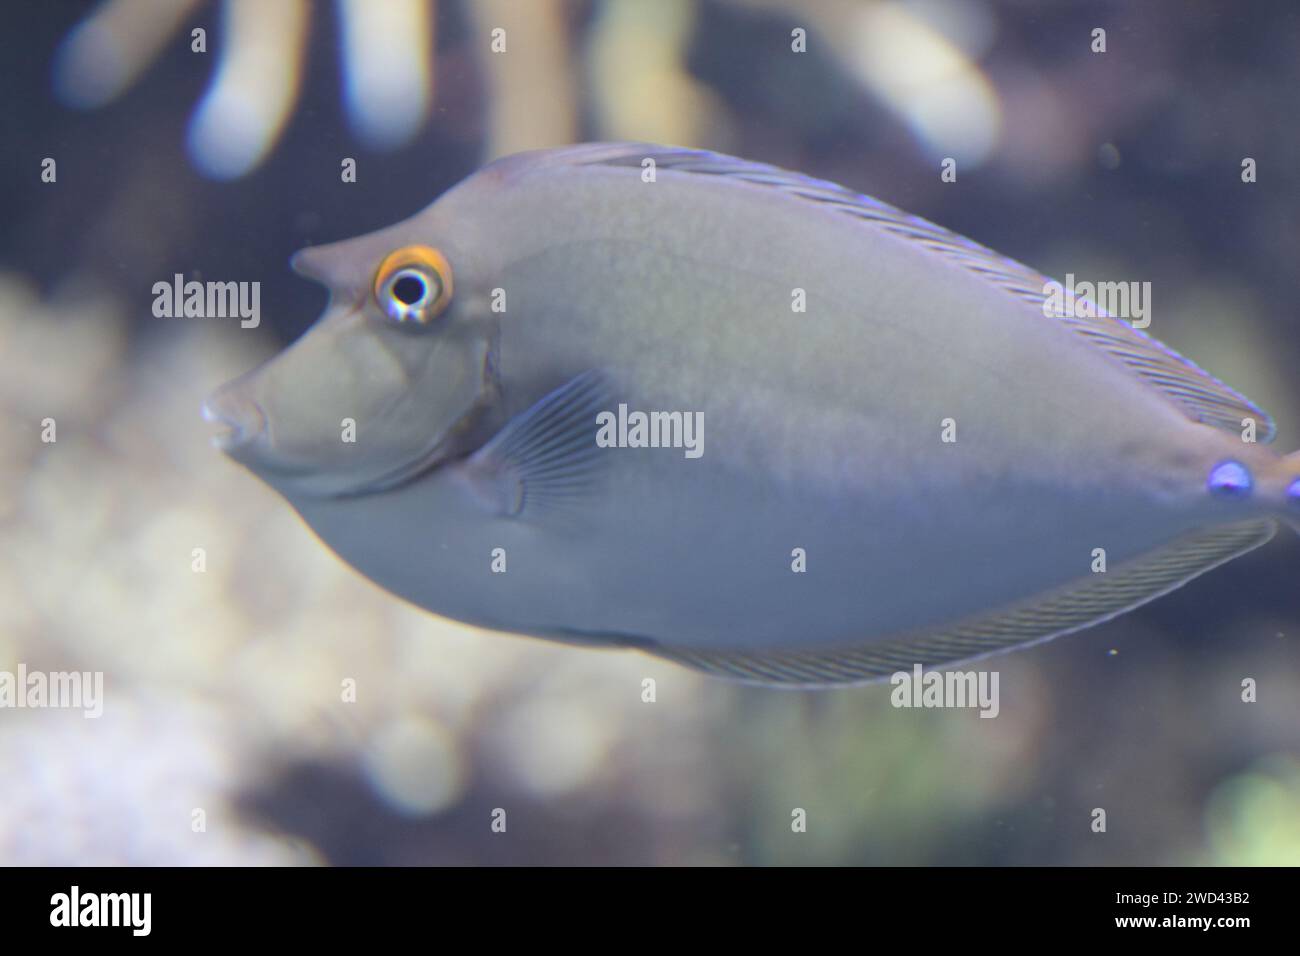 The bluespine unicornfish or short-nose unicornfish (Naso unicornis) is a tang from the Indo-Pacific Stock Photo